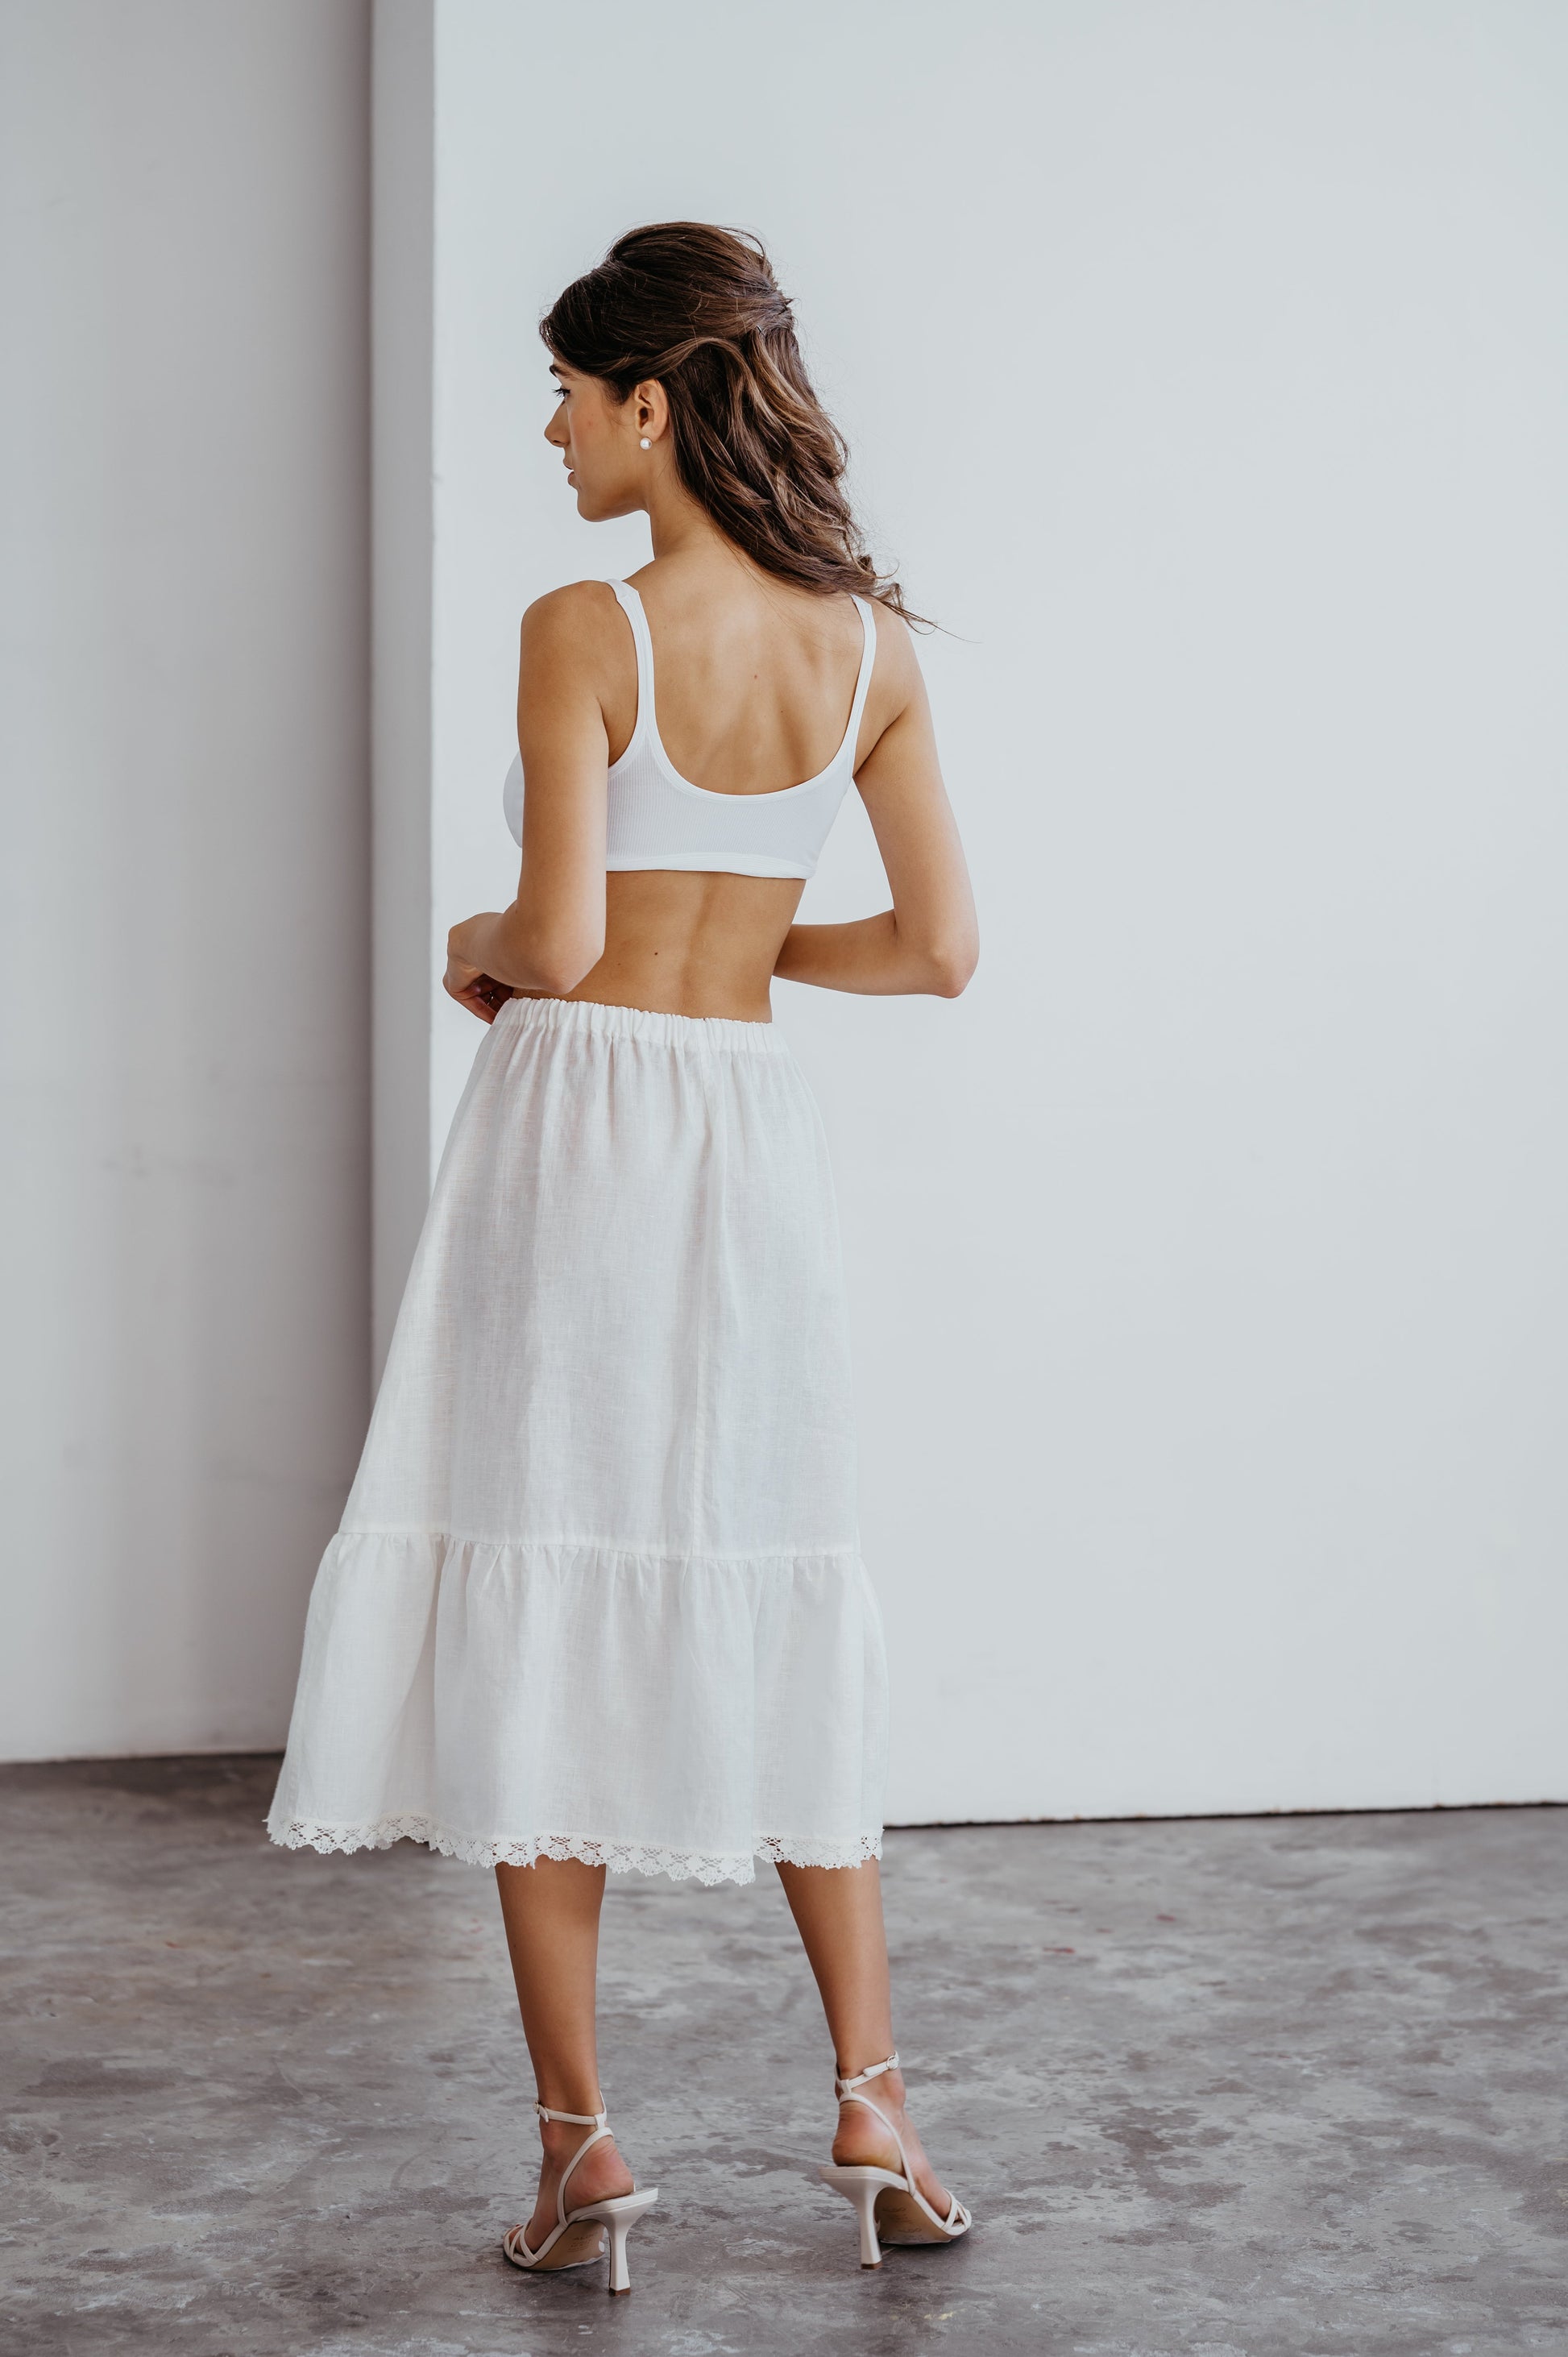 Linen Half Petticoat/ Underskirt Ruffled and Laced